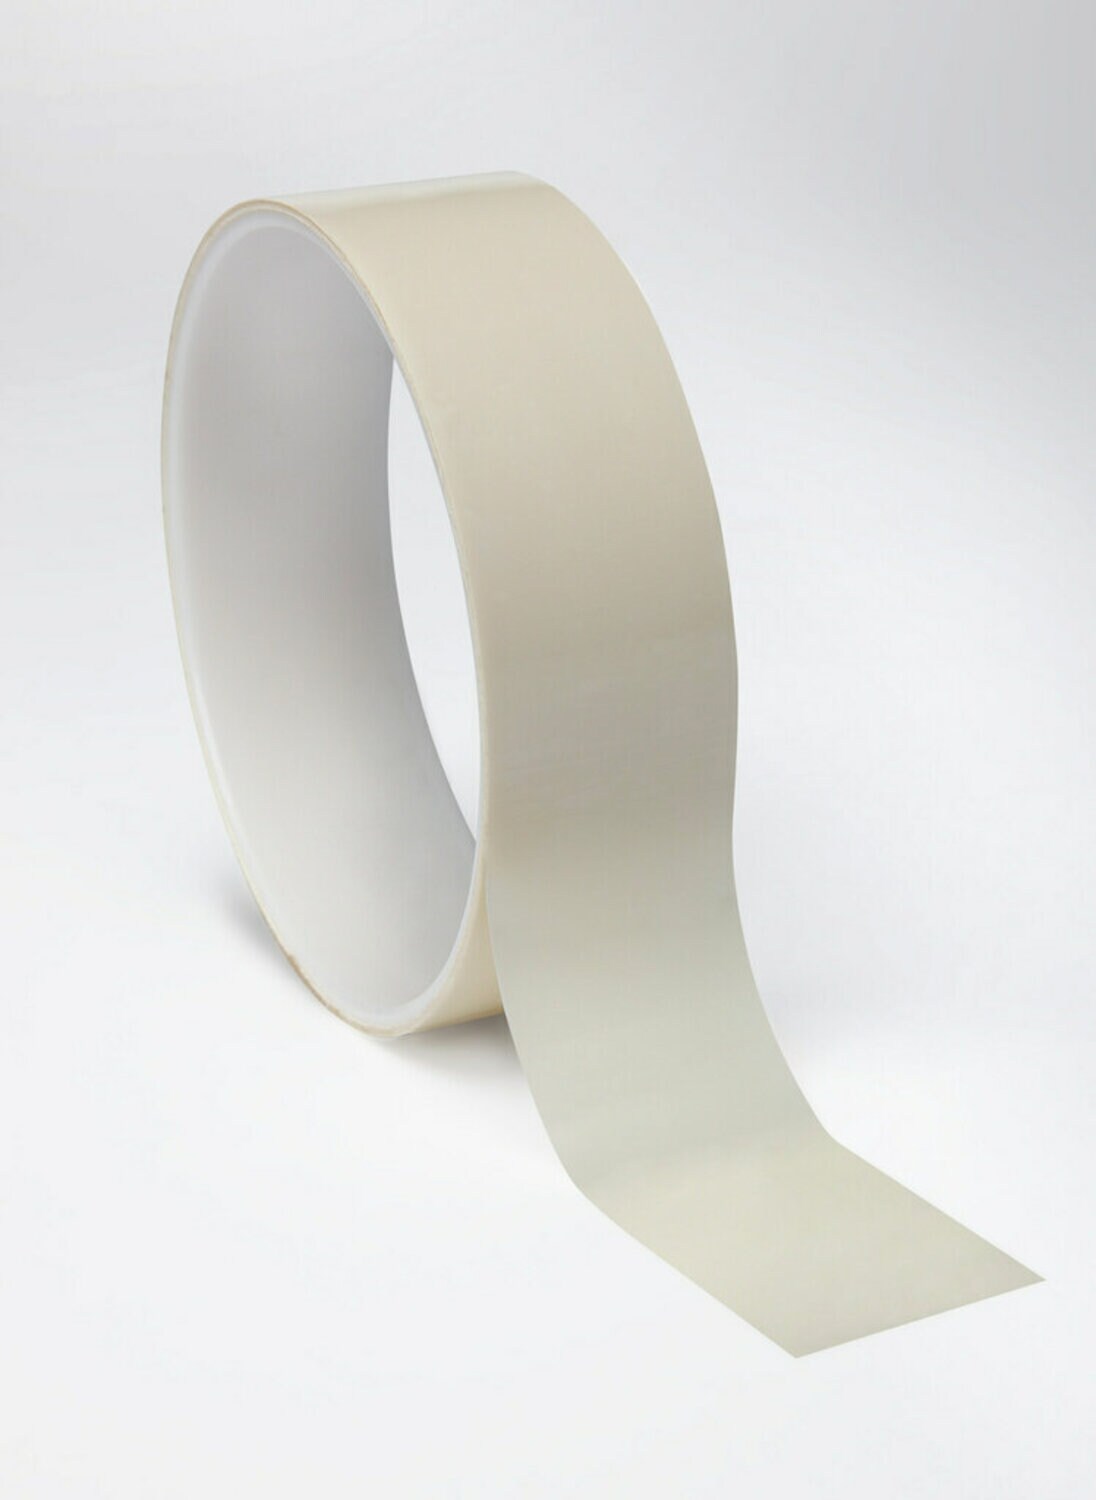 7010045166 - 3M Polyester Film Tape 854 White, 3/4 in x 72 yds x 2.7 mil, 48/Case